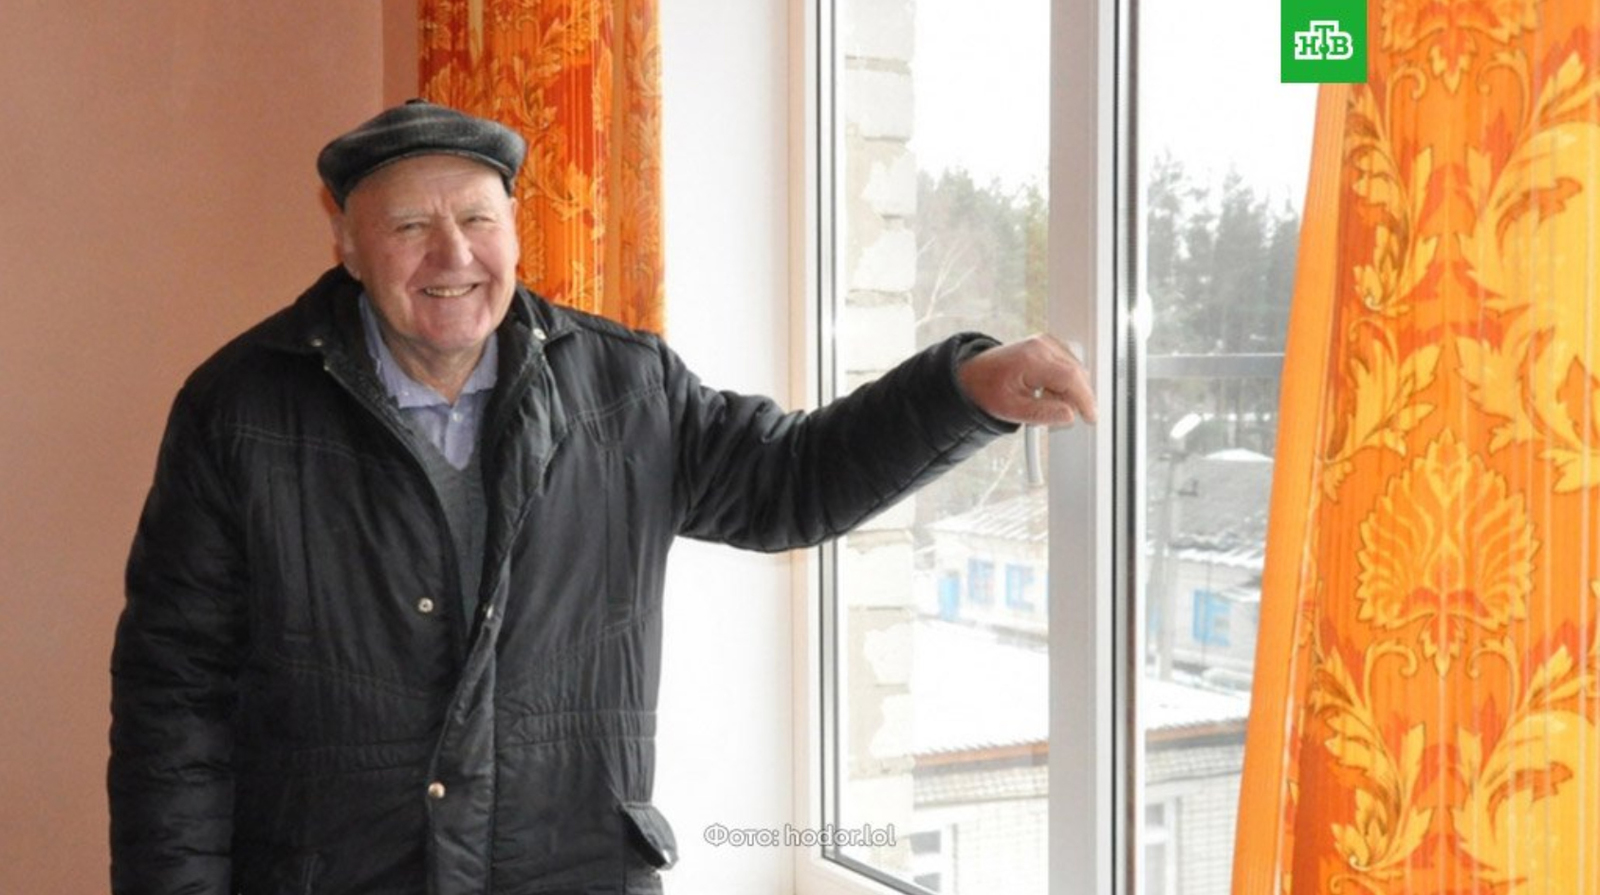 Voronezh pensioner bought two plastic windows for the district hospital. - Society, Russia, Voronezh, Retirees, Hospital, NTV, Twitter, Kindness